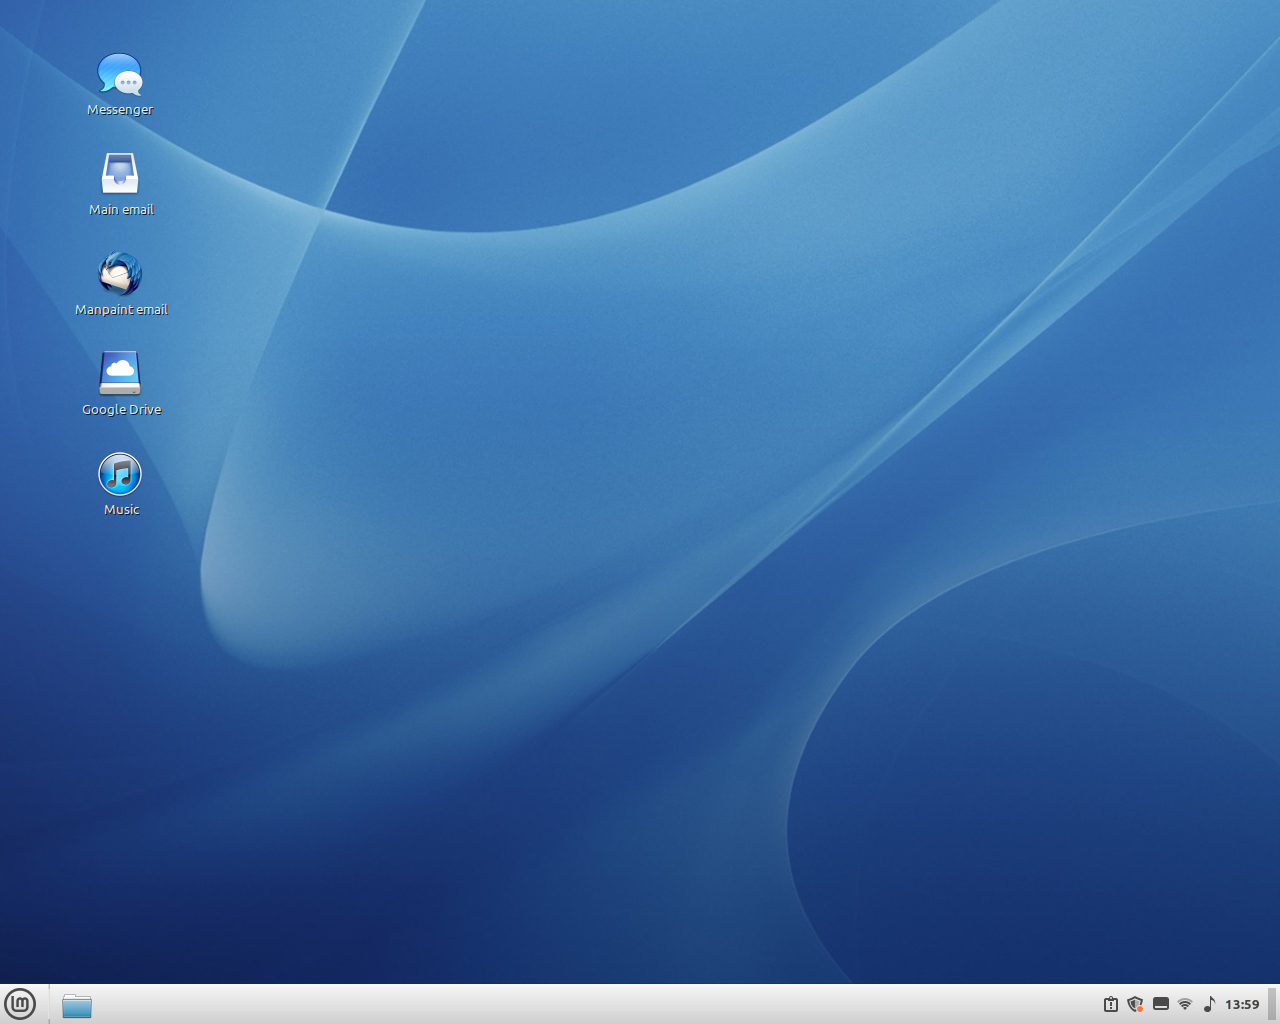 Image of my Linux Desktop, styled to look like Mac OS's Aqua themes